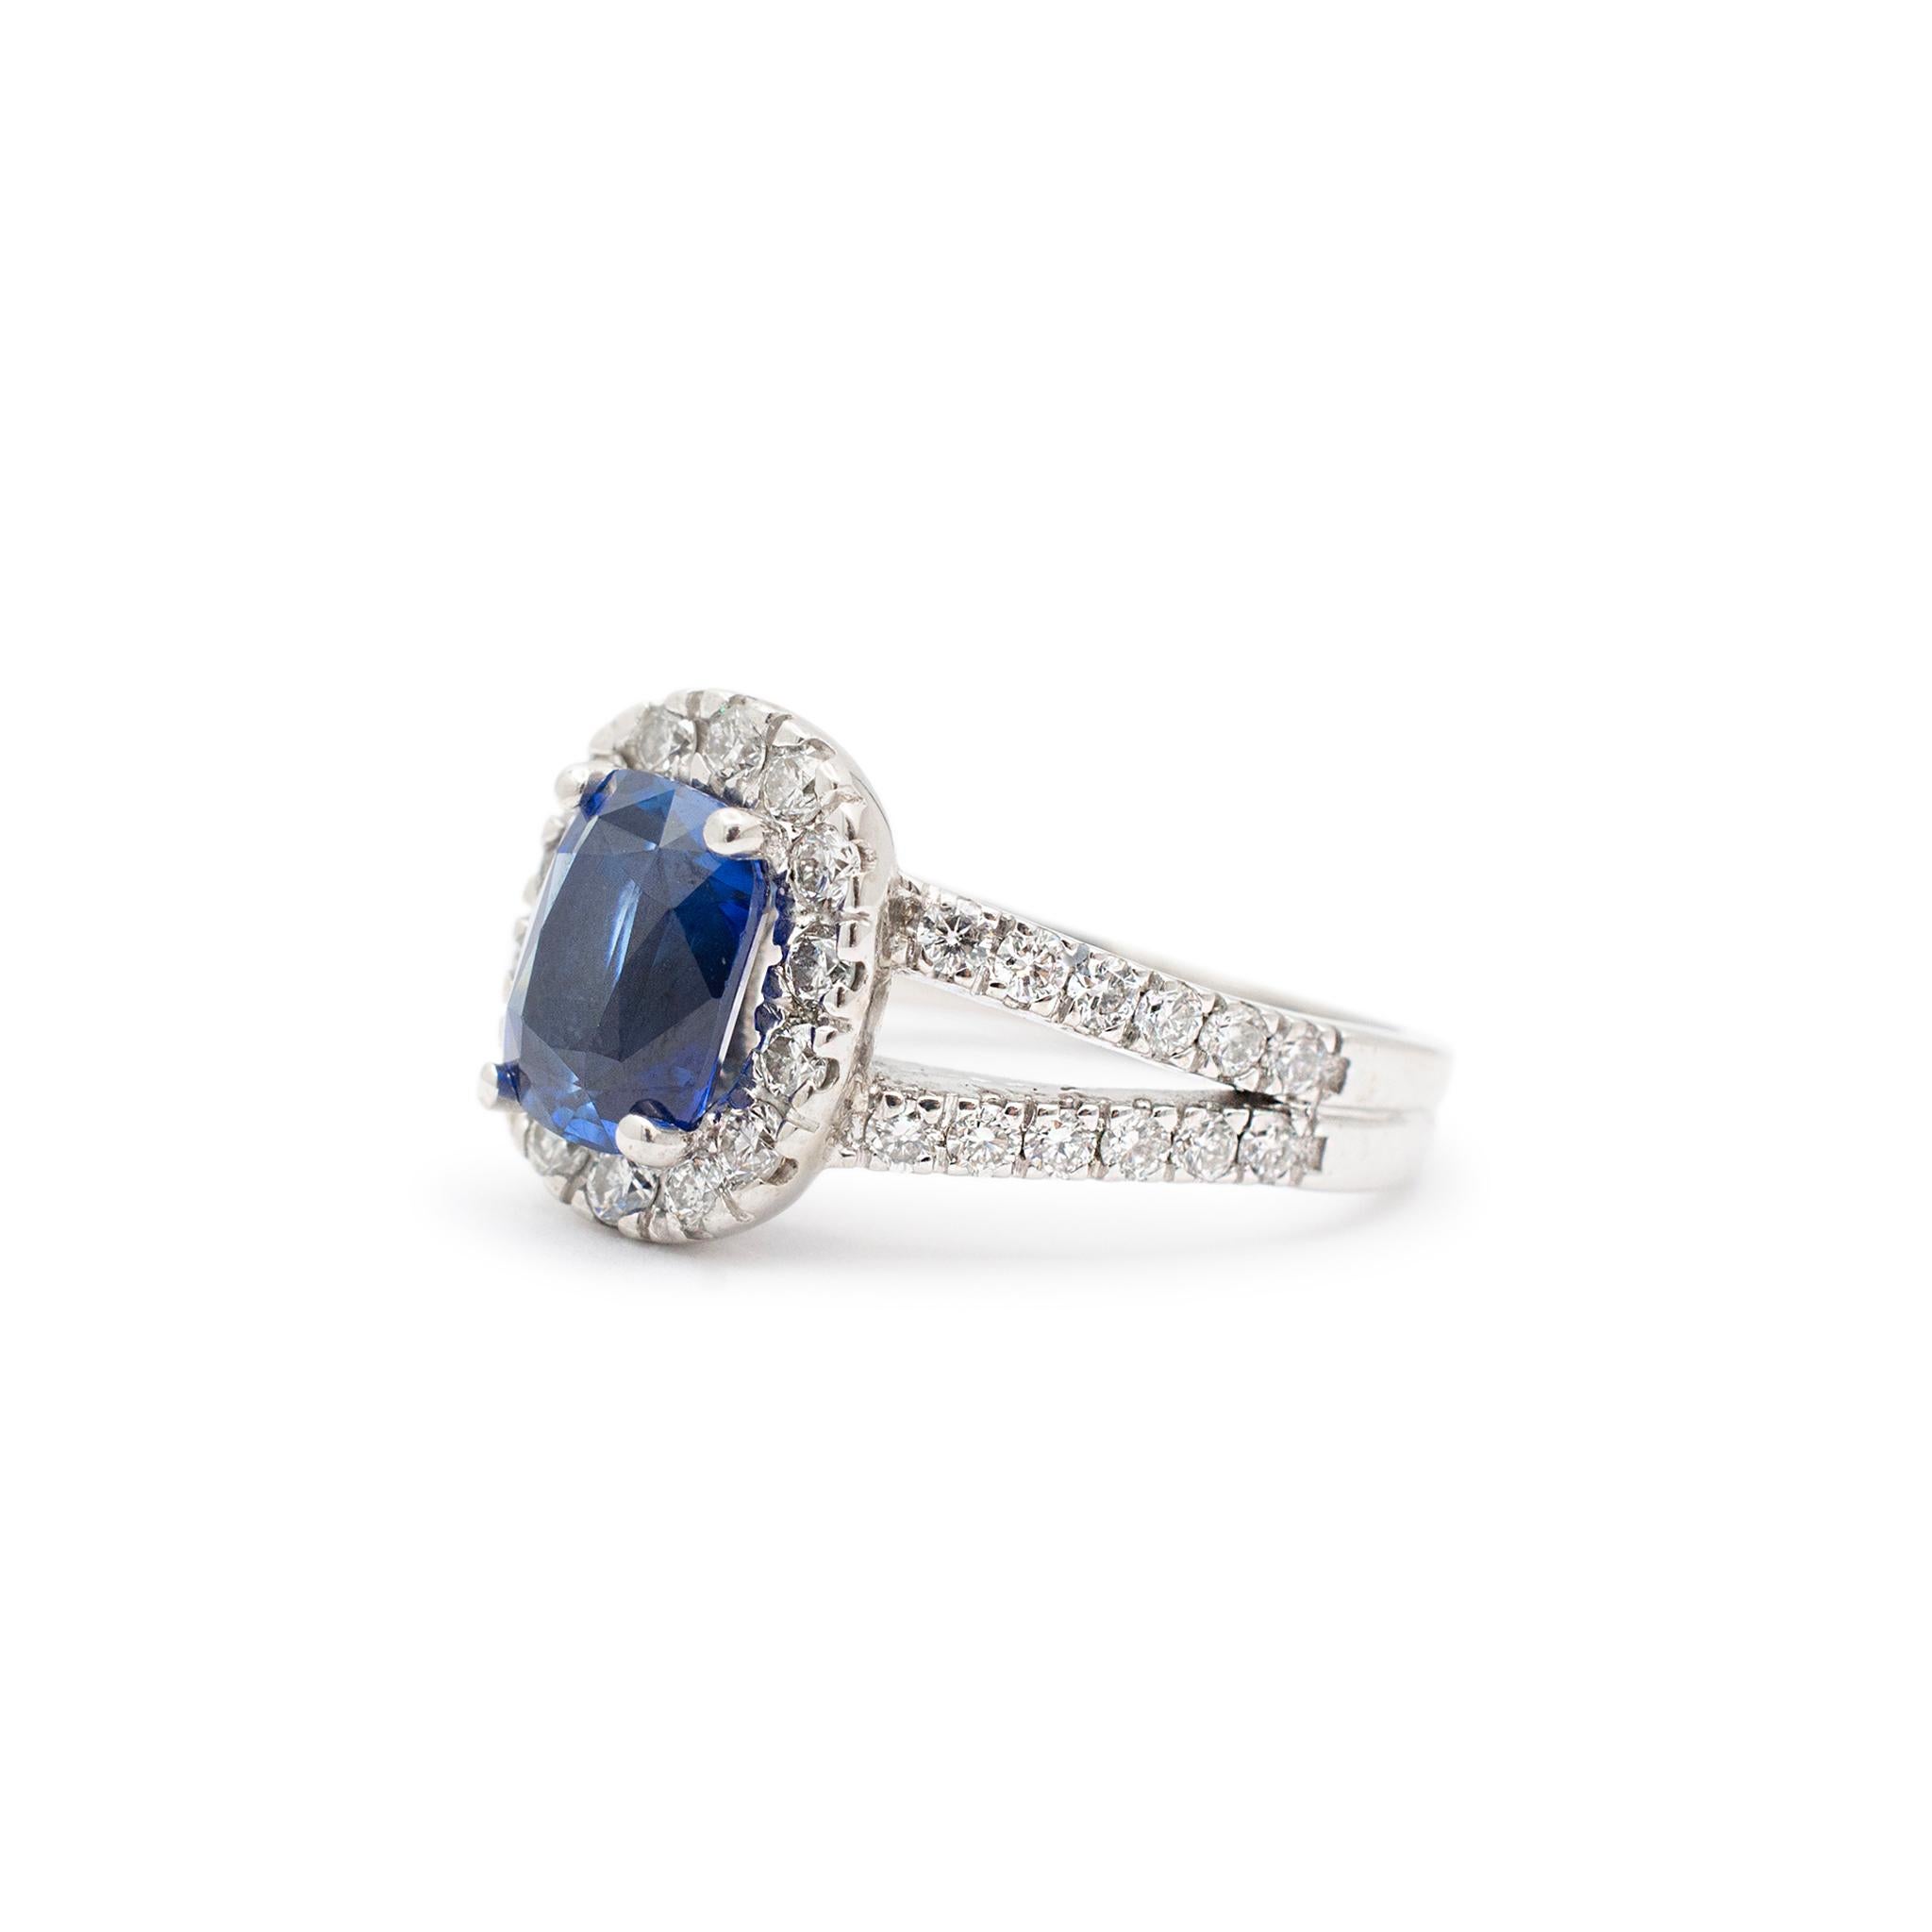 Gender: Ladies

Metal Type: 14K White Gold

Size: 5

Shank Maximum Width: 6.45mm tapering to 2.40mm

Head Measurement: 11.85mm x 9.90mm

Weight: 4.70 grams

Ladies 14K white gold diamond and sapphire accented halo cocktail ring with a split-shank